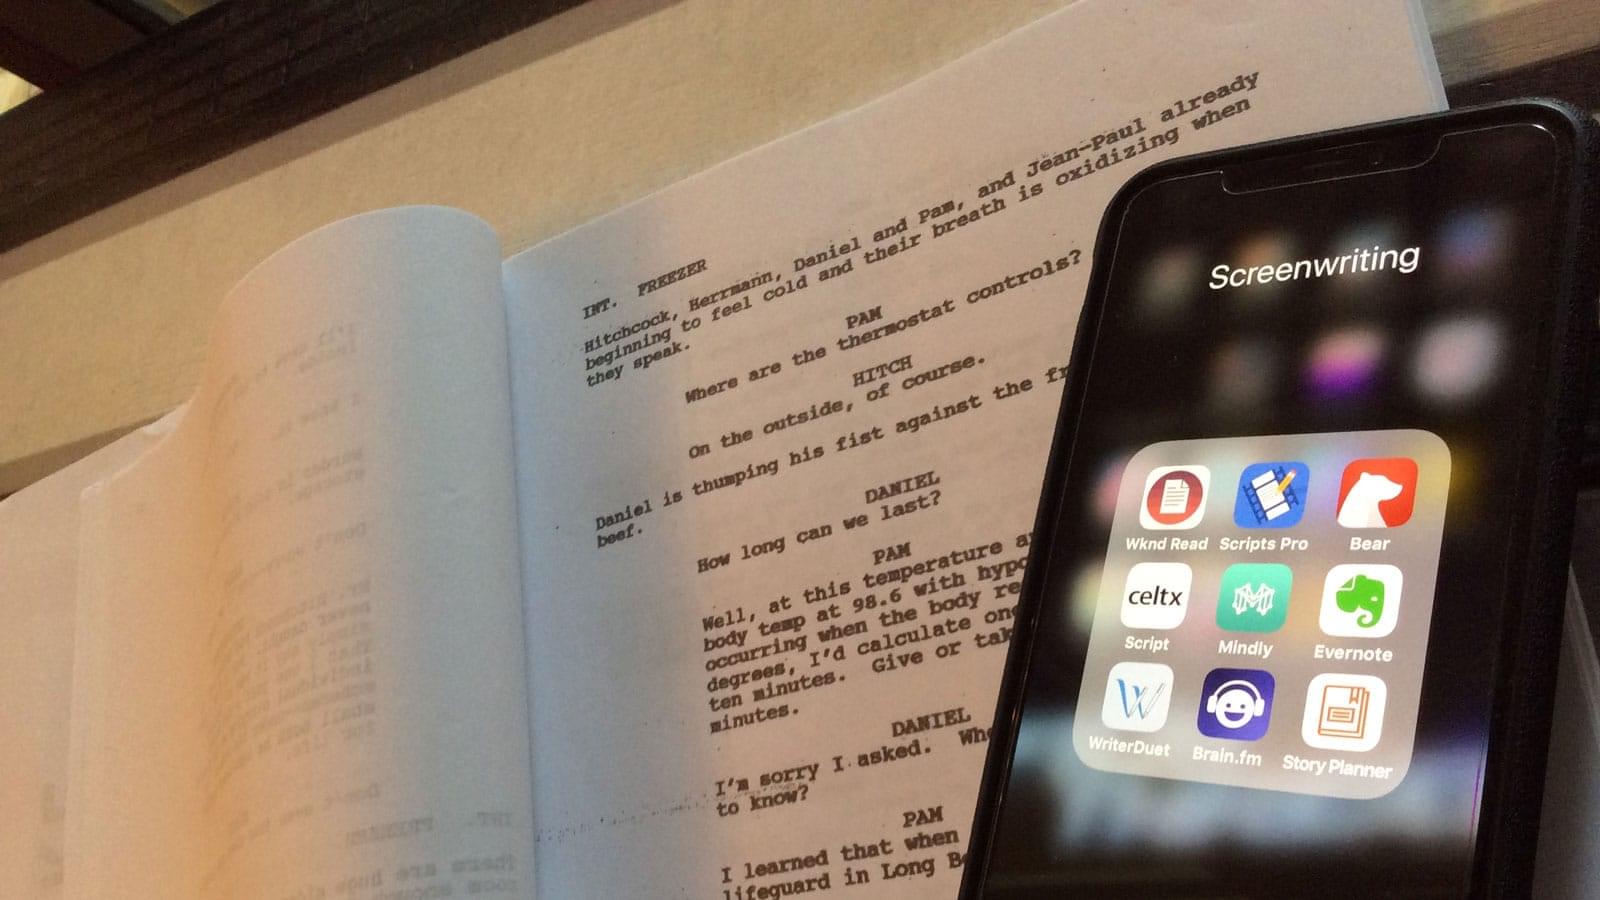 FEAT-Screenwriting-Apps-02 Image